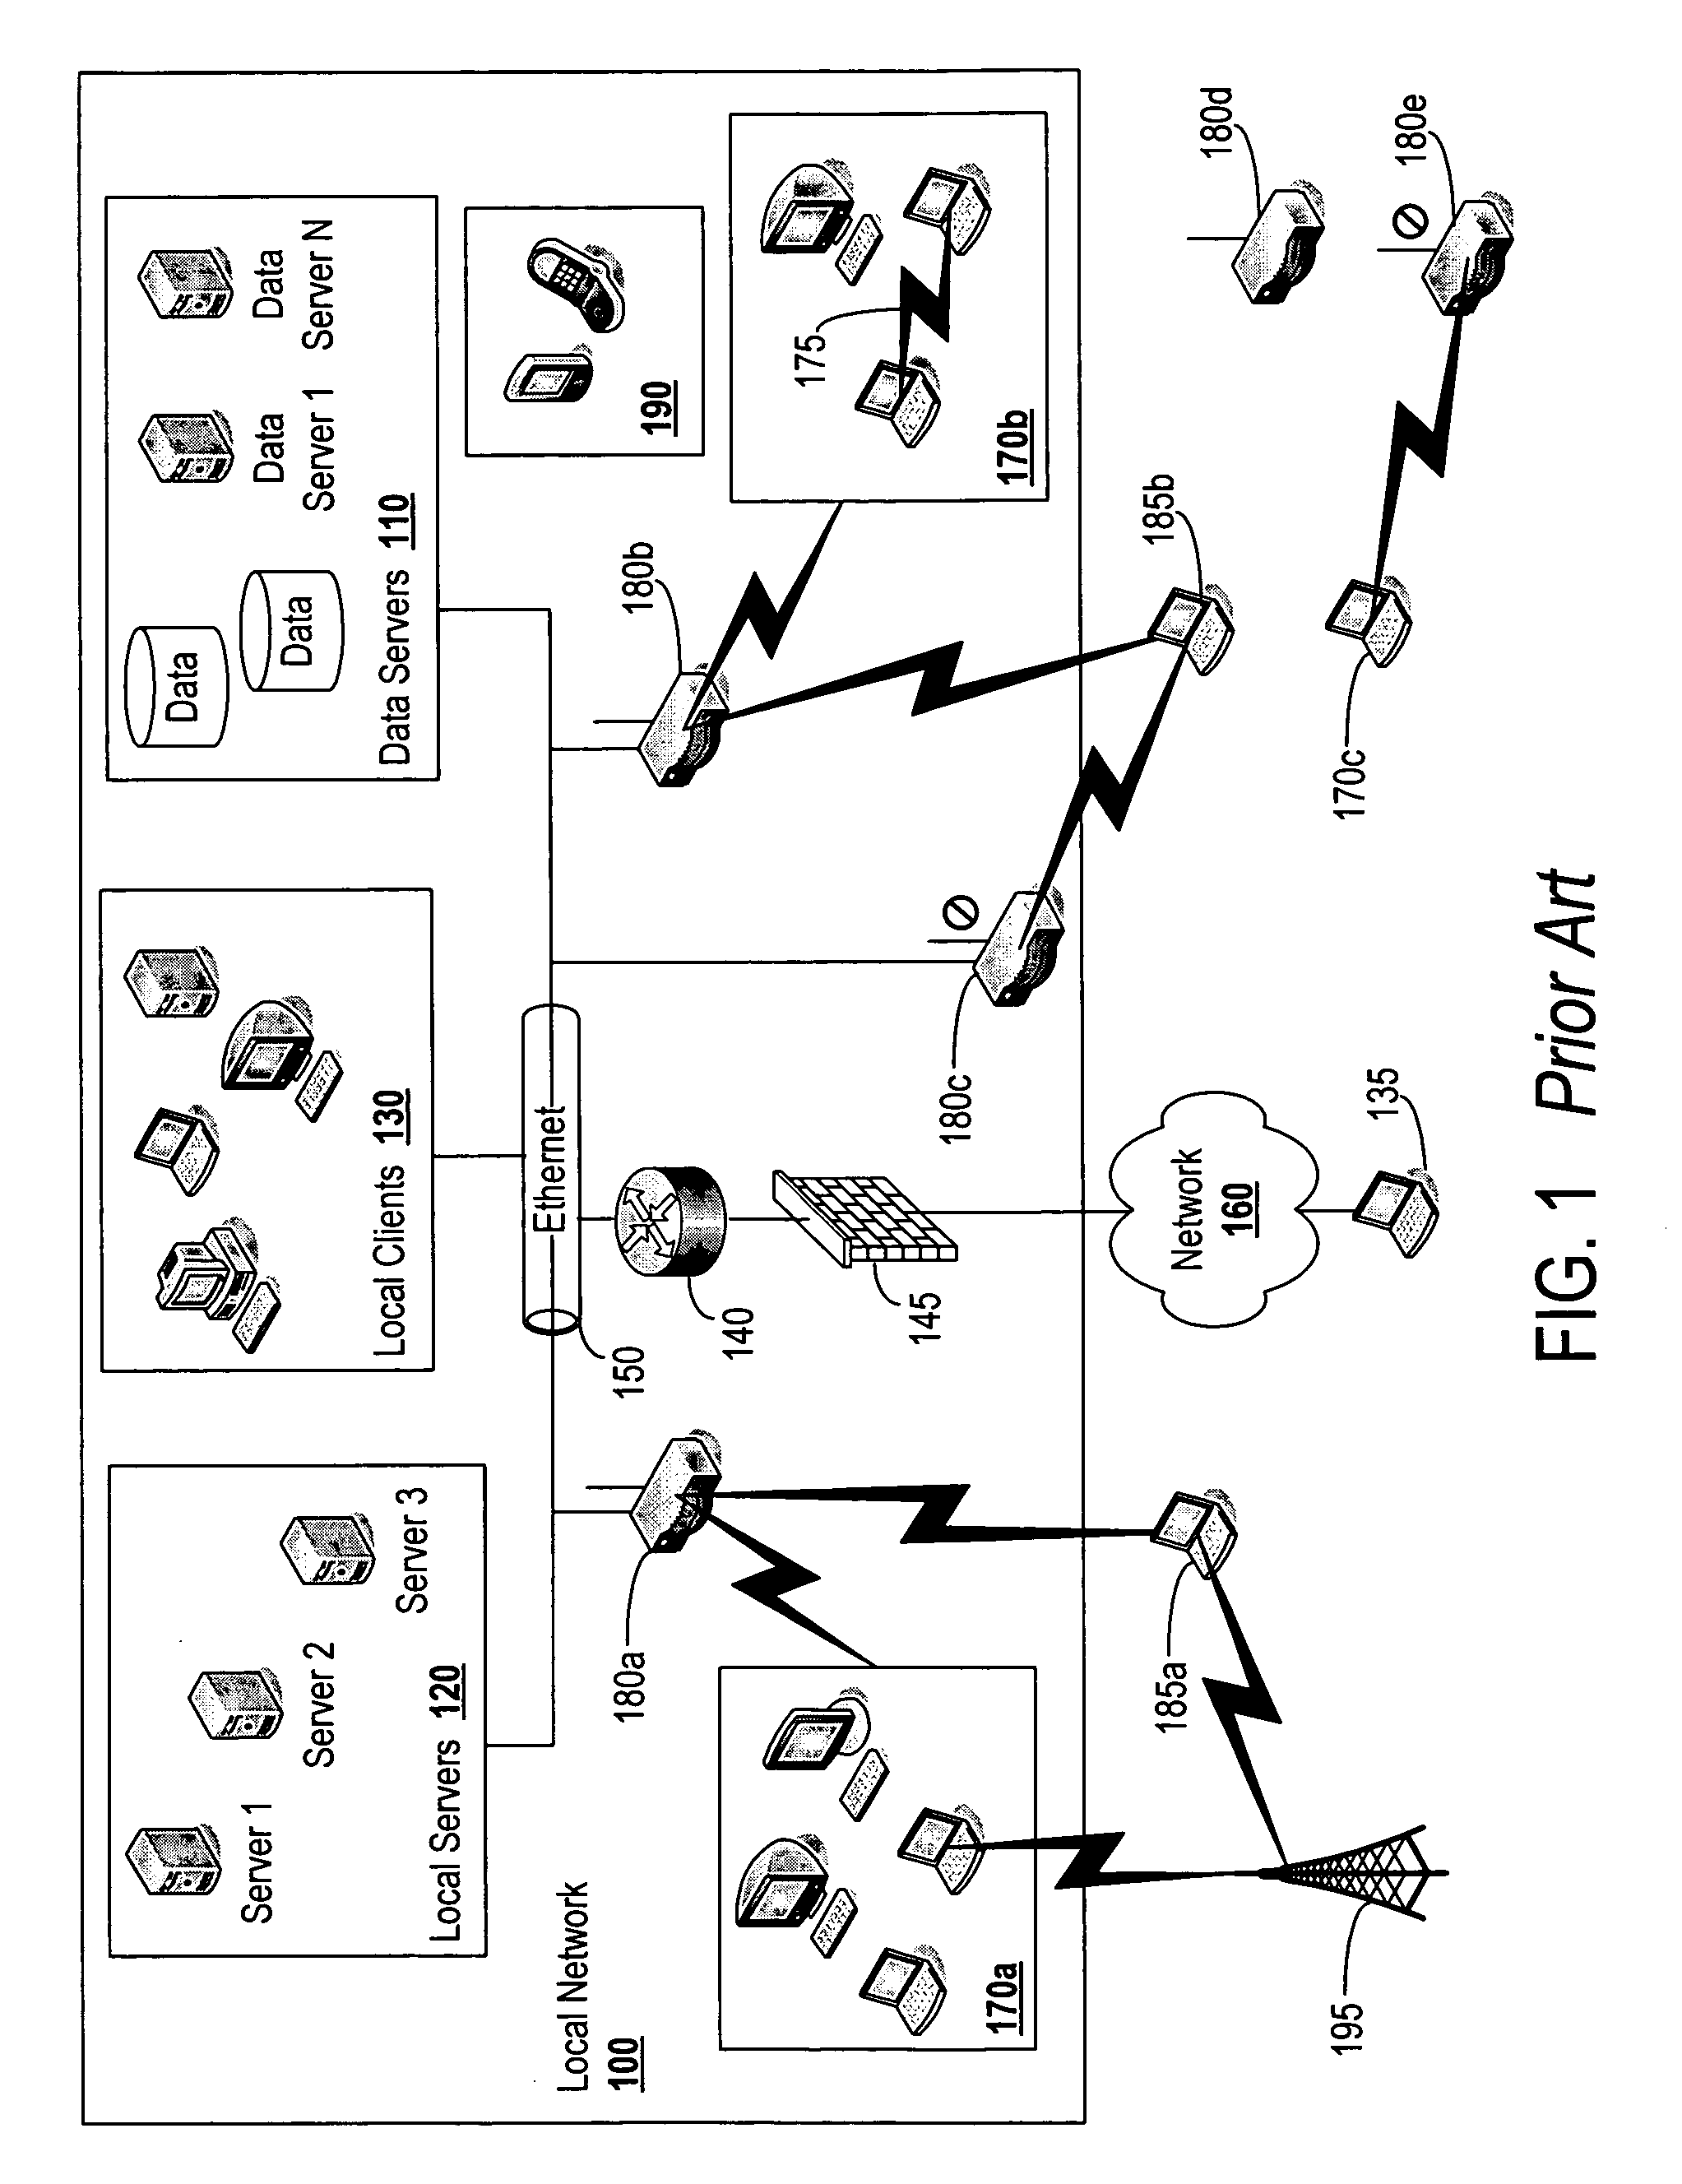 Systems and methods for proactively enforcing a wireless free zone